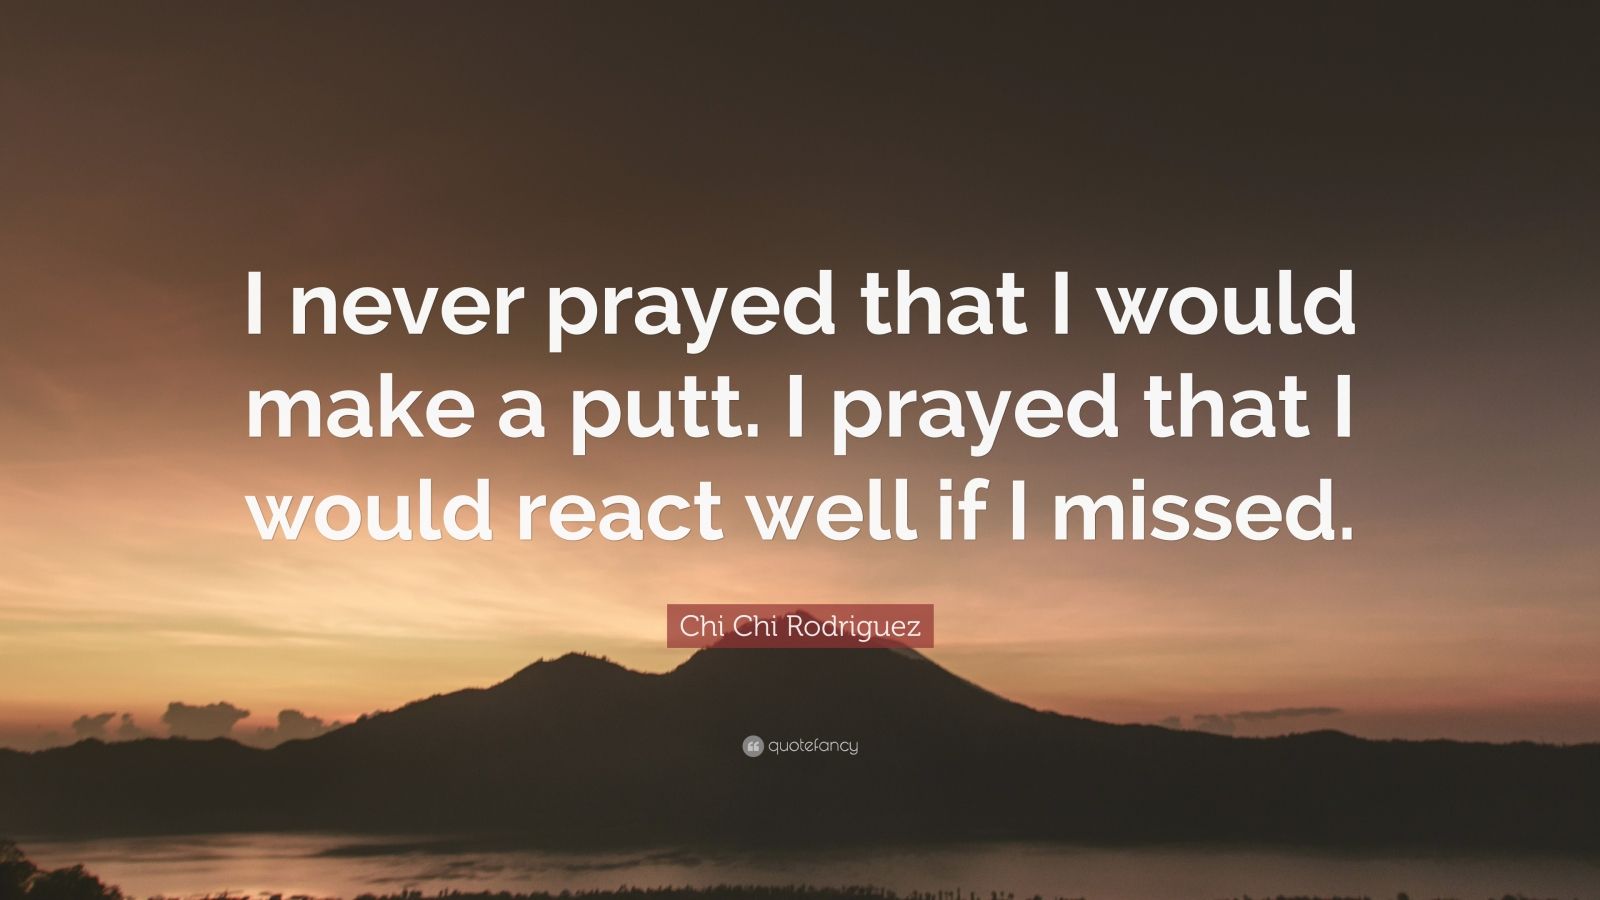 Chi Chi Rodriguez Quote “i Never Prayed That I Would Make A Putt I